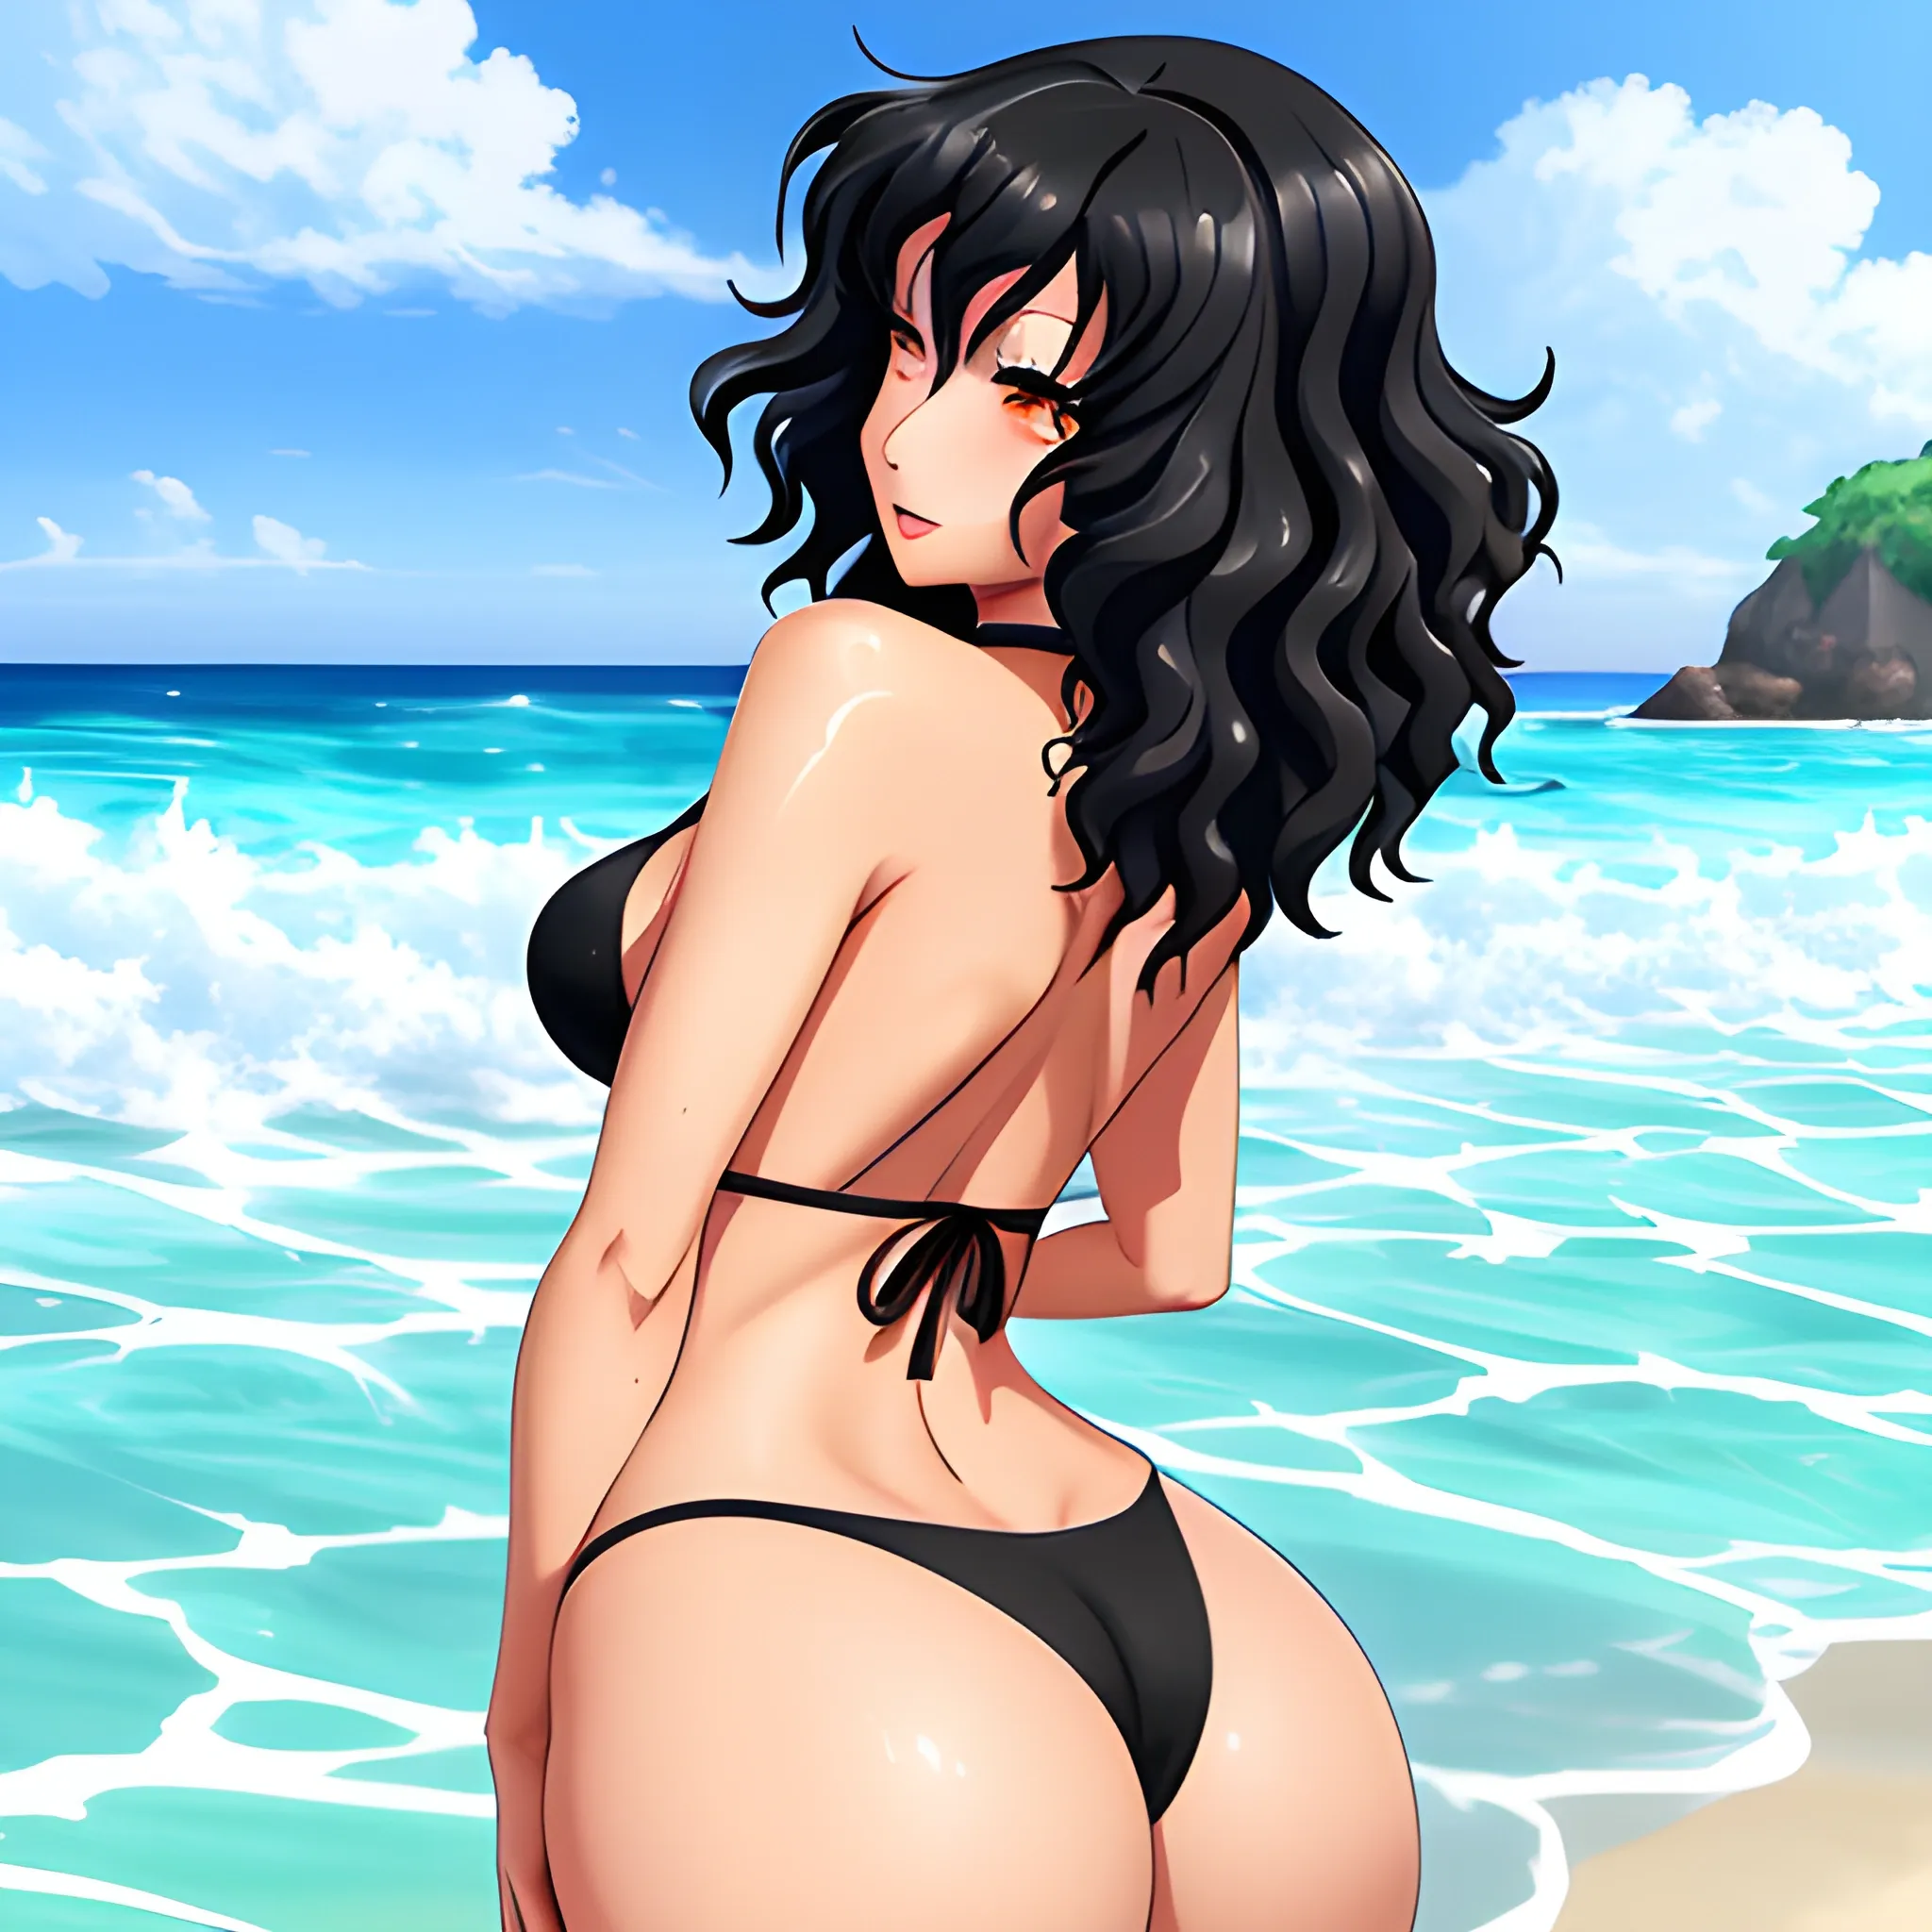 Anime,beach,rear view,cute girl,cartoon,hand under big butt, 1 girl, black curly hair, black micro bikini, black choker, perfect face expressions, perfect anatomy, medium breasts, wide hips, thicc thighs, wet skin, beach, summer, bathing in the sea water, splashing water, extremely detailed CG, high detail, extremely detailed artwork, masterpiece artwork


